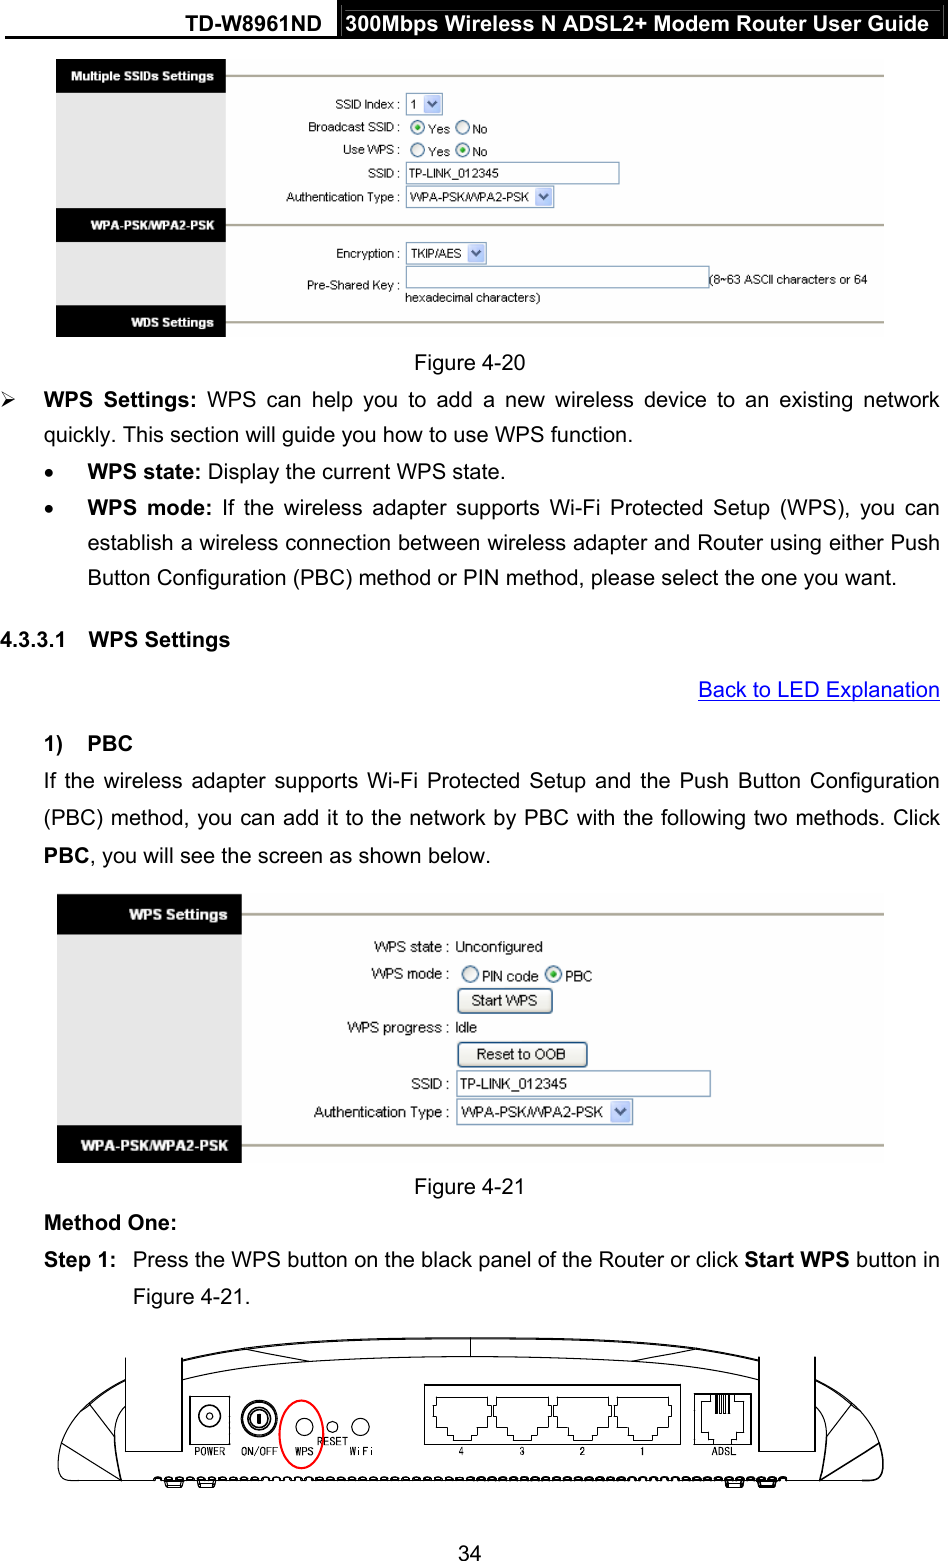 TD-W8961ND  300Mbps Wireless N ADSL2+ Modem Router User Guide  34 Figure 4-20 ¾ WPS Settings: WPS can help you to add a new wireless device to an existing network quickly. This section will guide you how to use WPS function. • WPS state: Display the current WPS state. • WPS mode: If the wireless adapter supports Wi-Fi Protected Setup (WPS), you can establish a wireless connection between wireless adapter and Router using either Push Button Configuration (PBC) method or PIN method, please select the one you want. 4.3.3.1  WPS Settings Back to LED Explanation 1) PBC If the wireless adapter supports Wi-Fi Protected Setup and the Push Button Configuration (PBC) method, you can add it to the network by PBC with the following two methods. Click PBC, you will see the screen as shown below.  Figure 4-21 Method One: Step 1:  Press the WPS button on the black panel of the Router or click Start WPS button in Figure 4-21.  